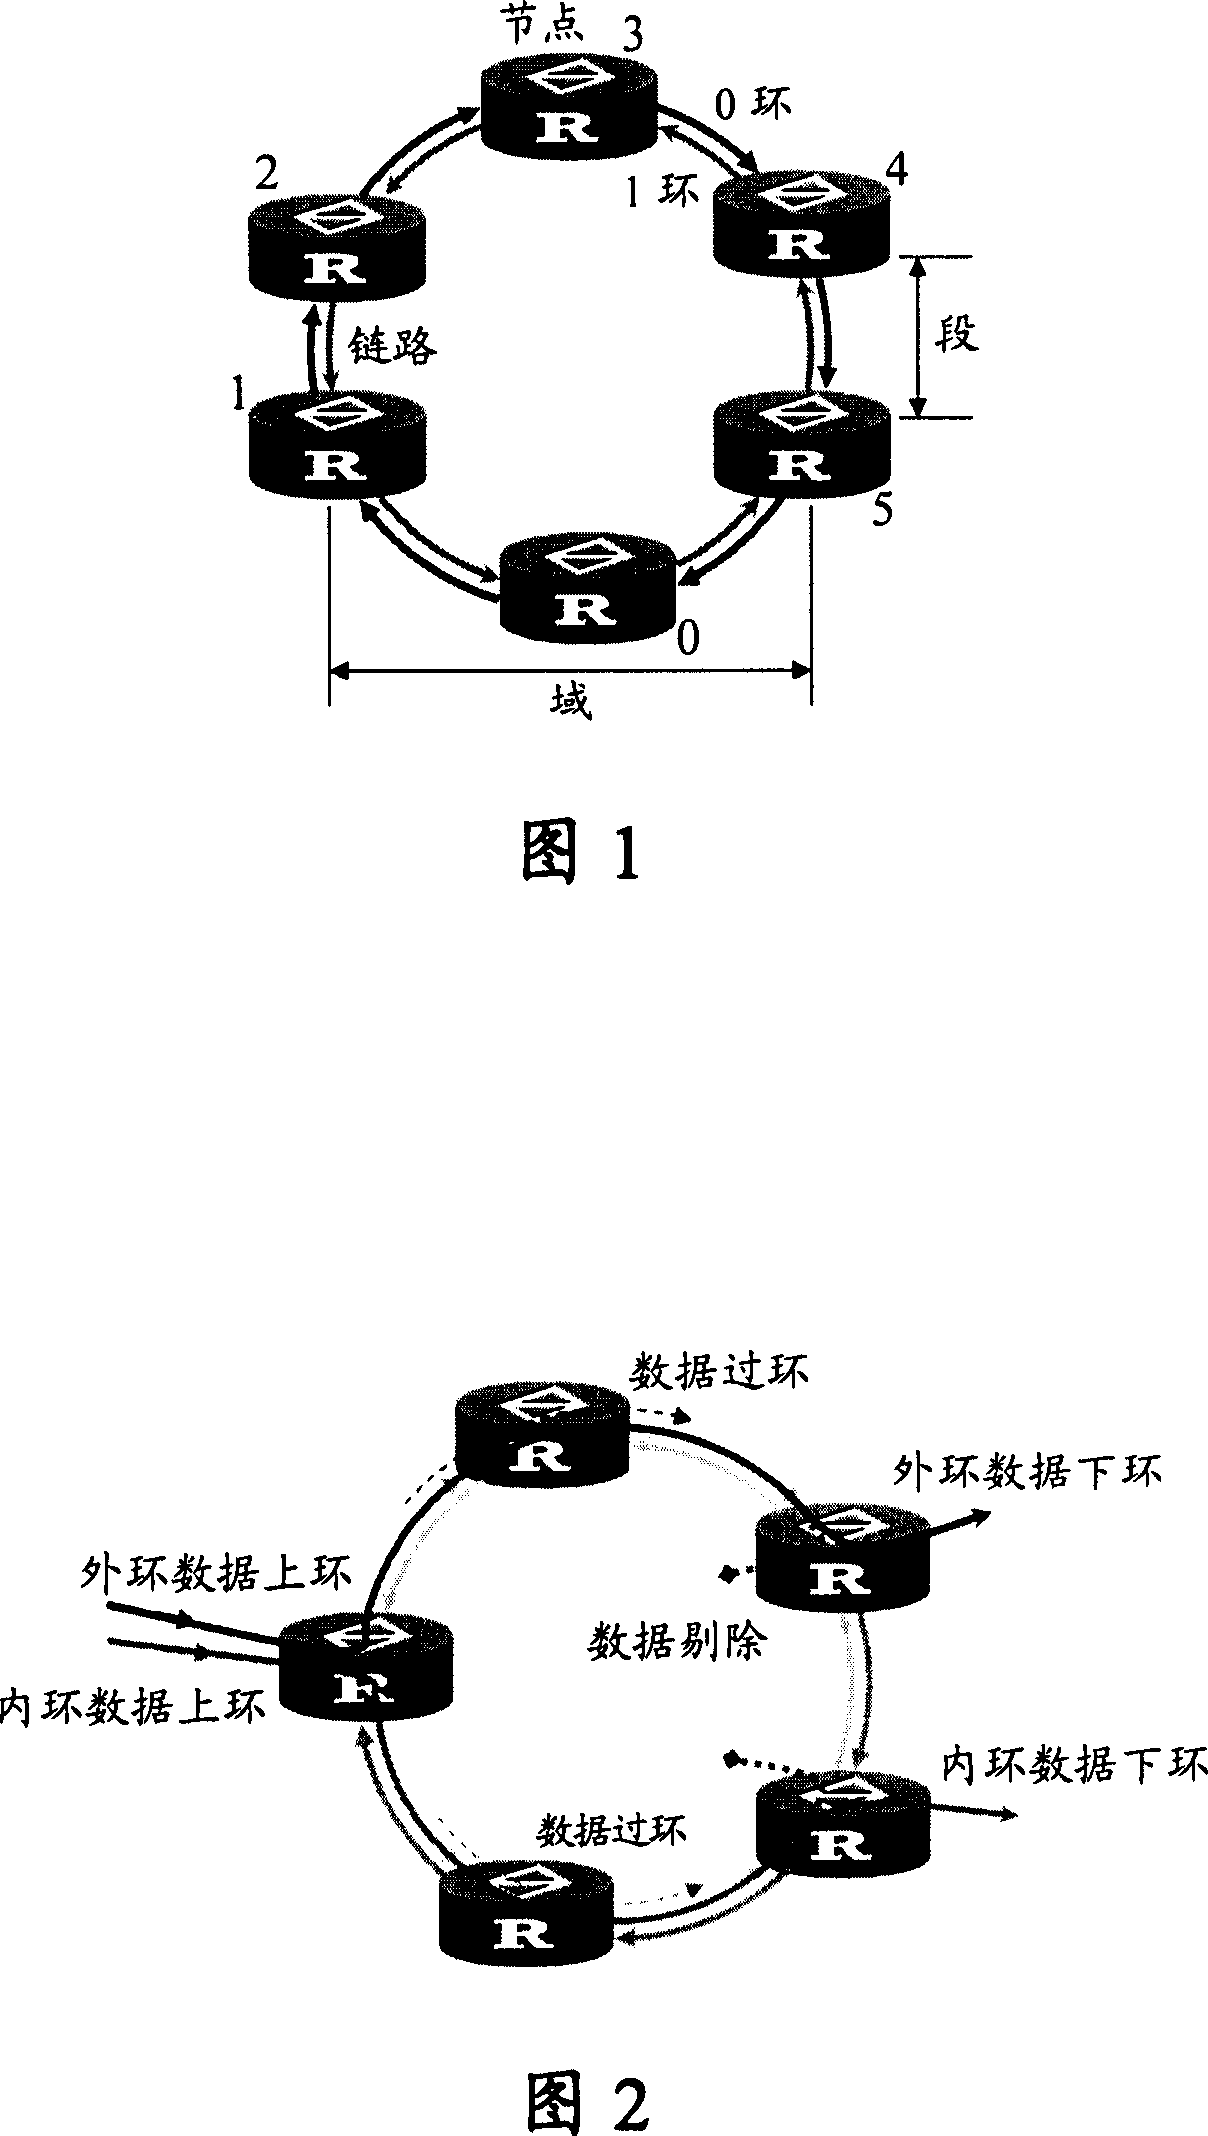 Ring-closure determining method and device for resilient packet ring